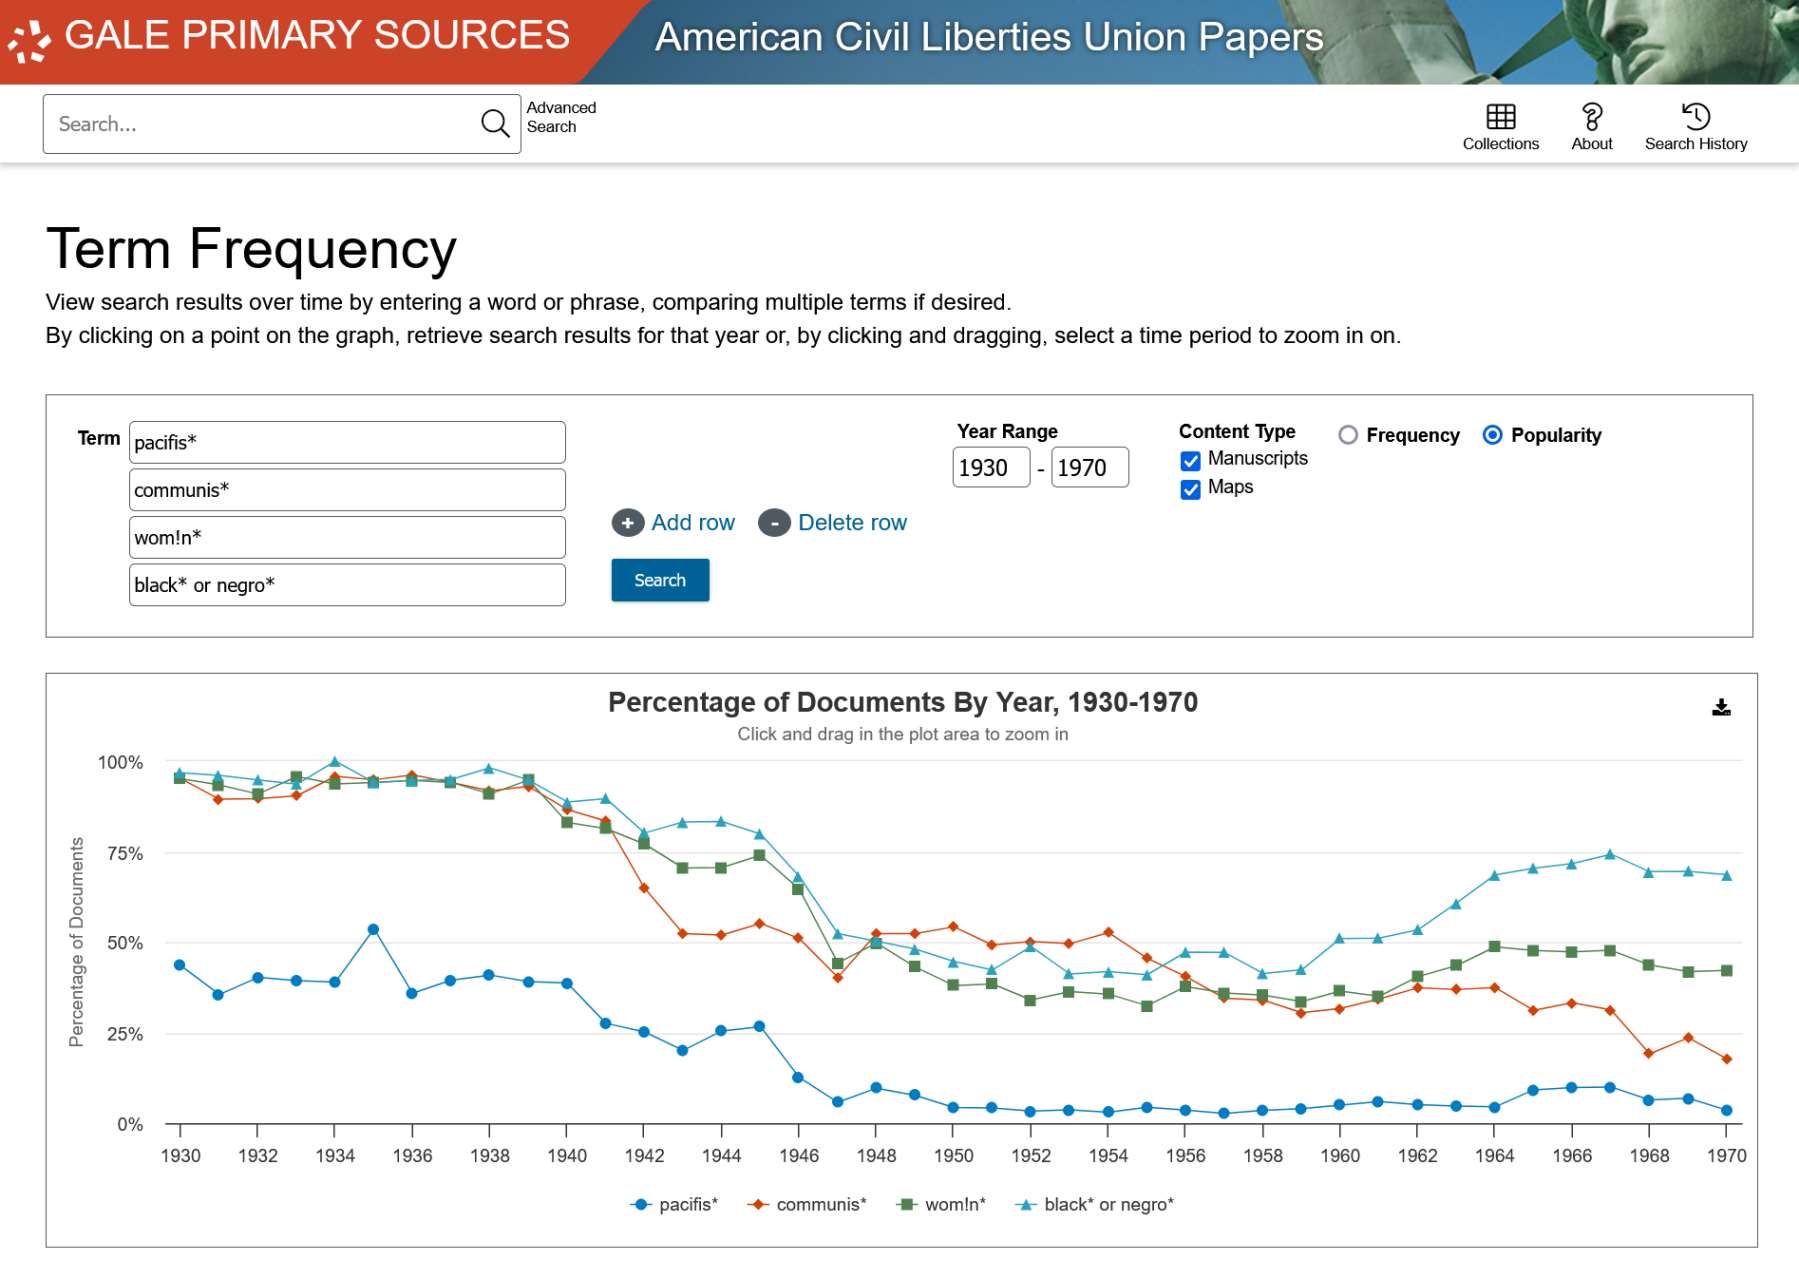 The Making of Modern Law: American Civil Liberties Union PapersのTerm Frequency機能